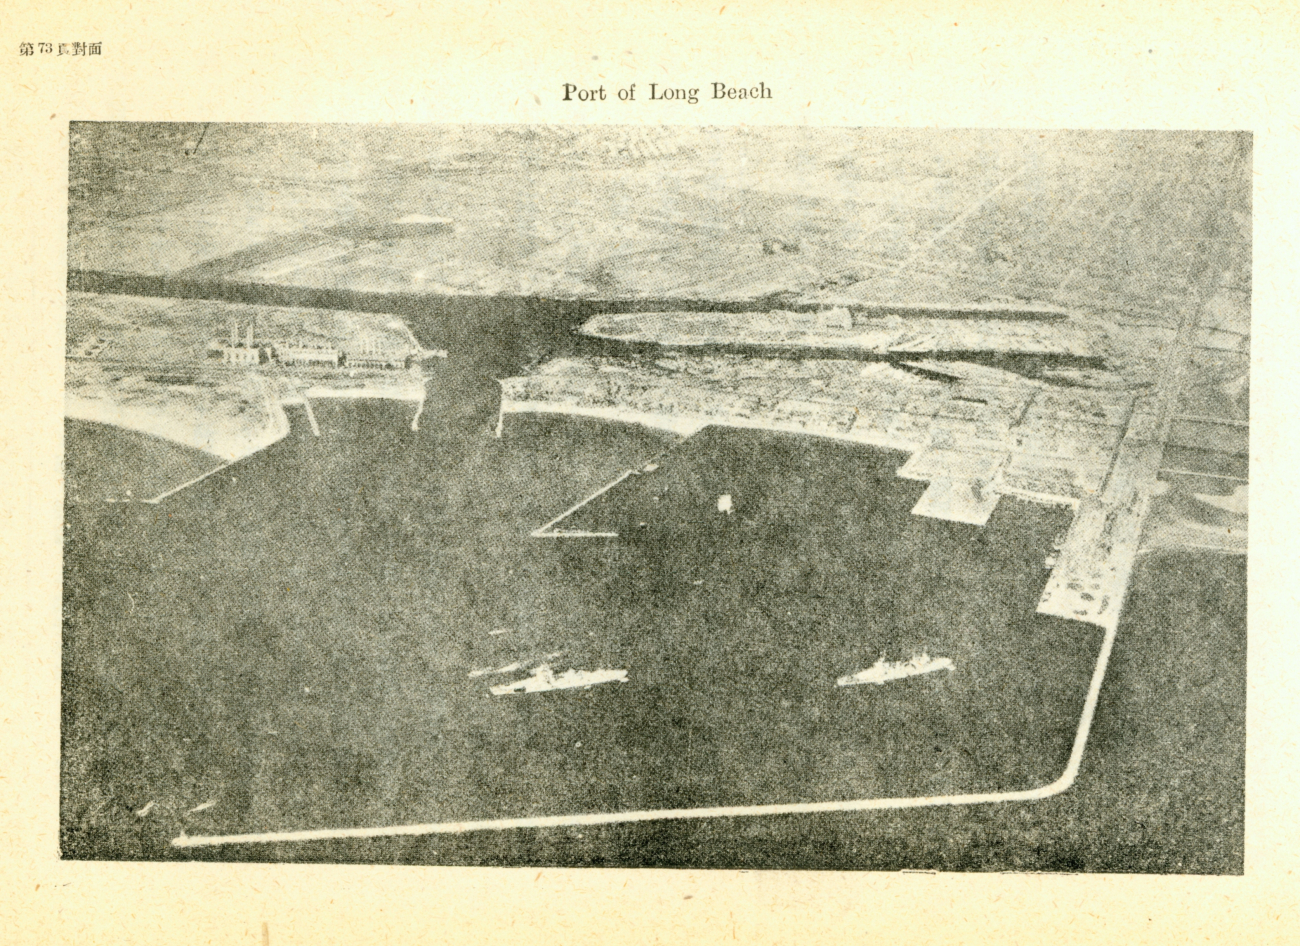 Aerial view of Port of Long Beach showing location of facilities and UnitedStates warships